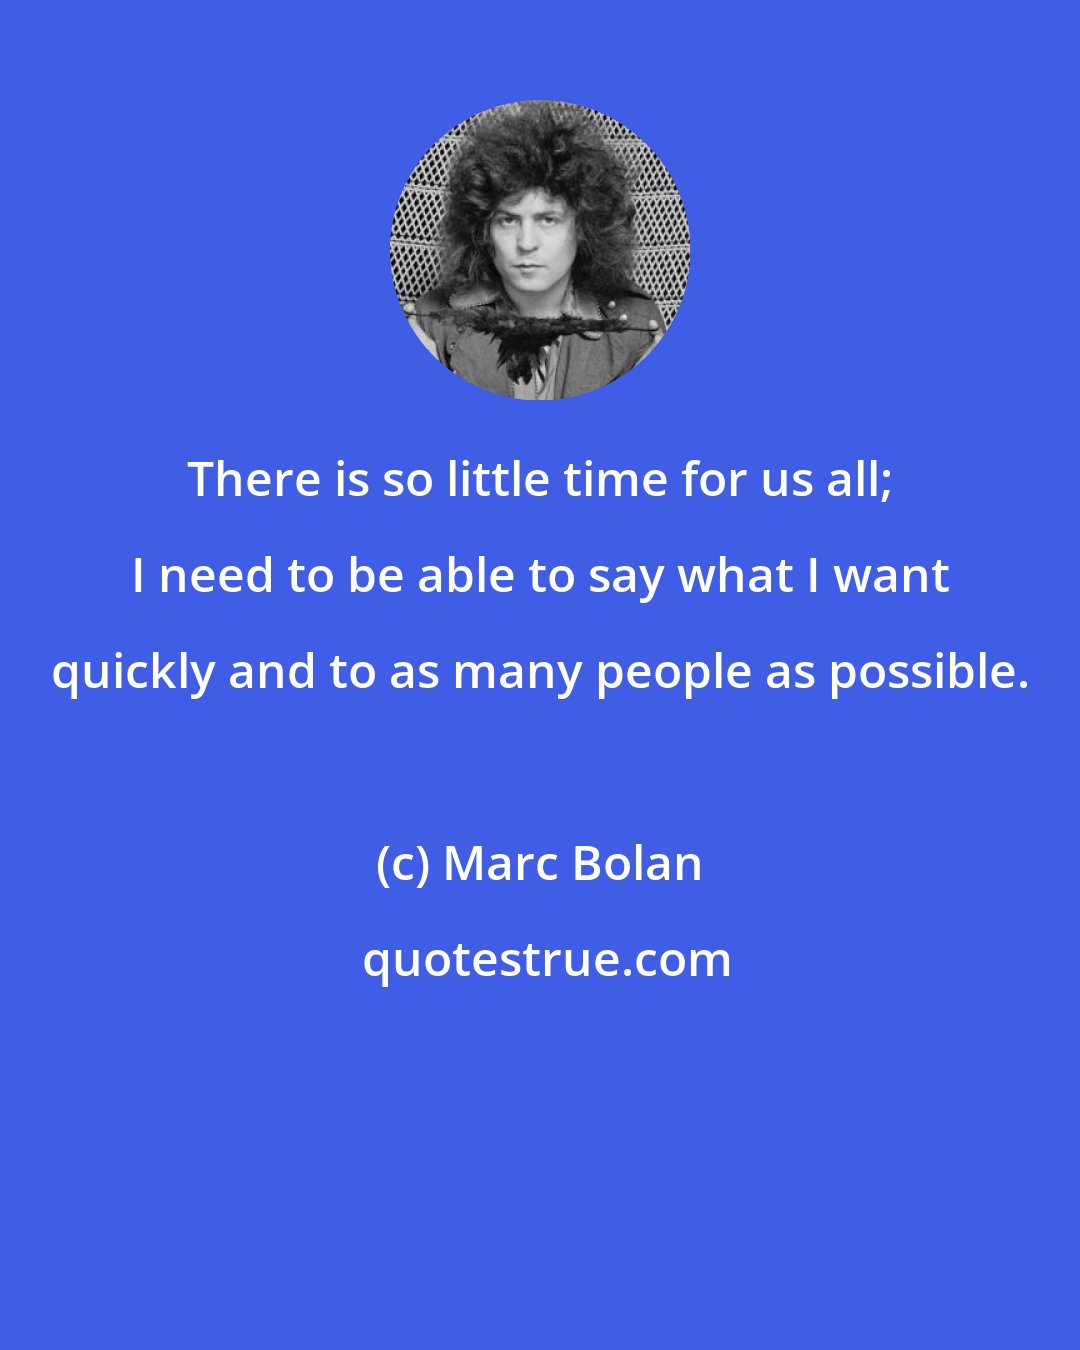 Marc Bolan: There is so little time for us all; I need to be able to say what I want quickly and to as many people as possible.